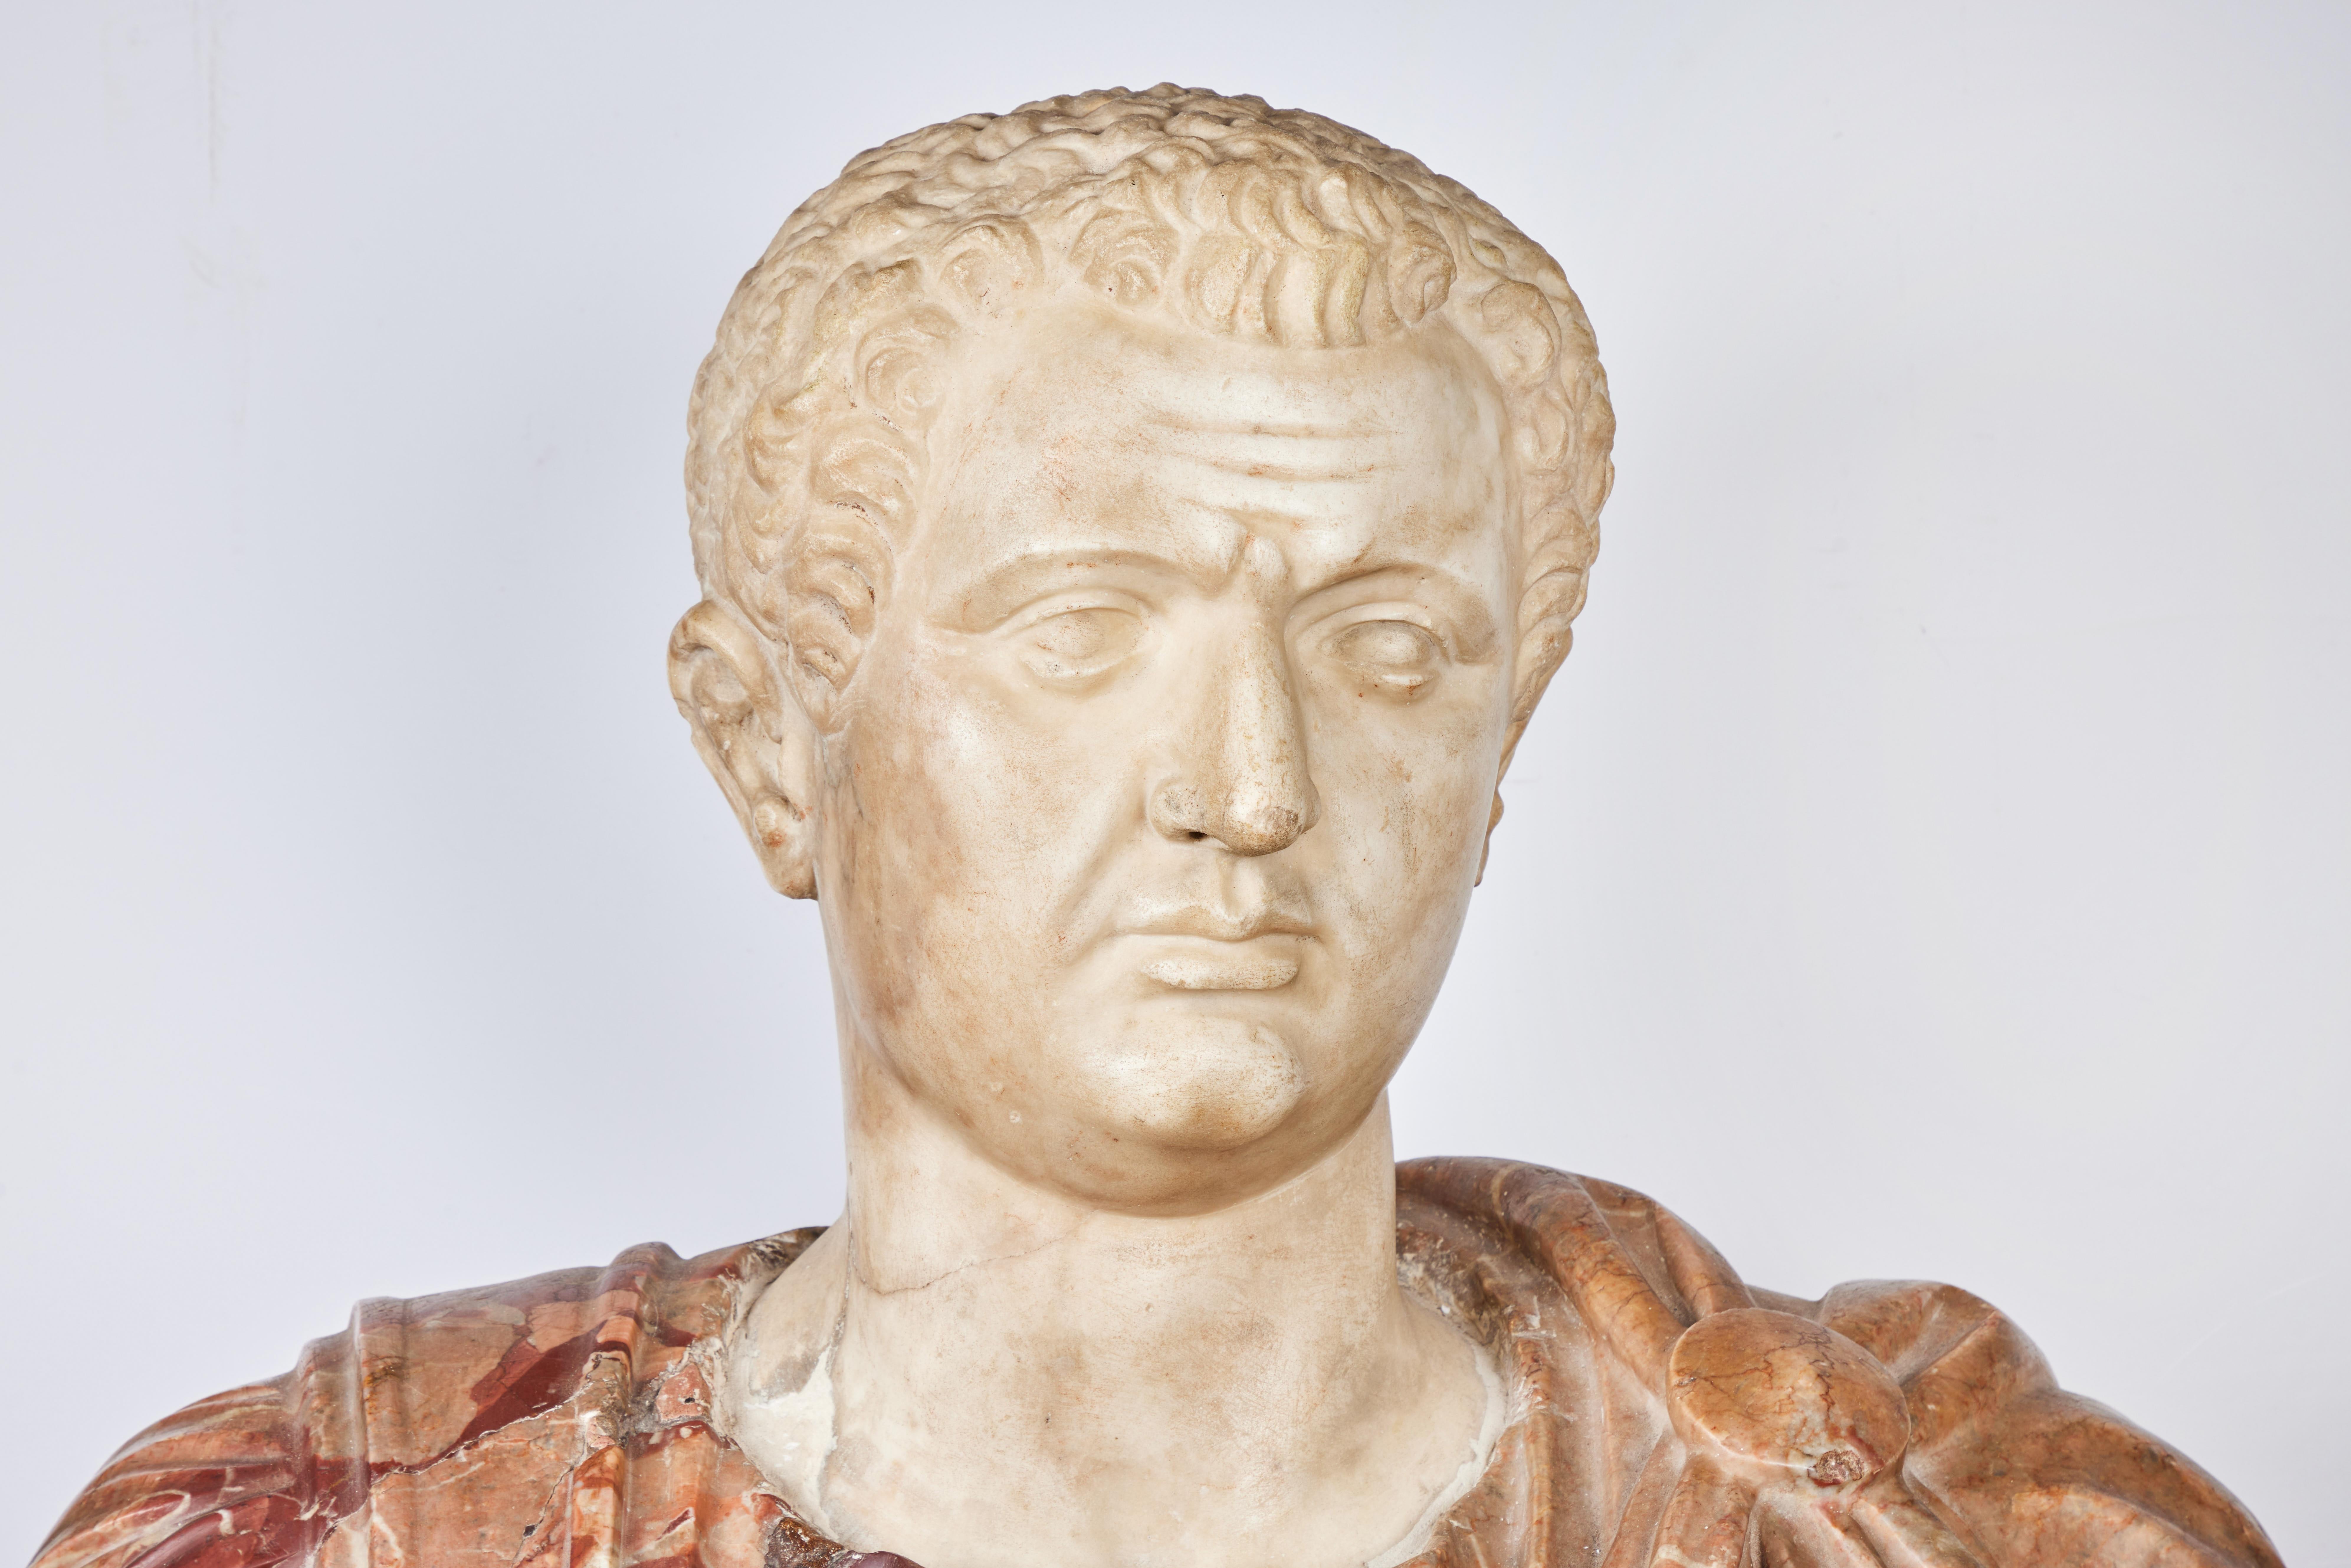 A beautifully hand carved Roman marble bust of an Emperor or Senator. The richly draped robe features a relief of a face.